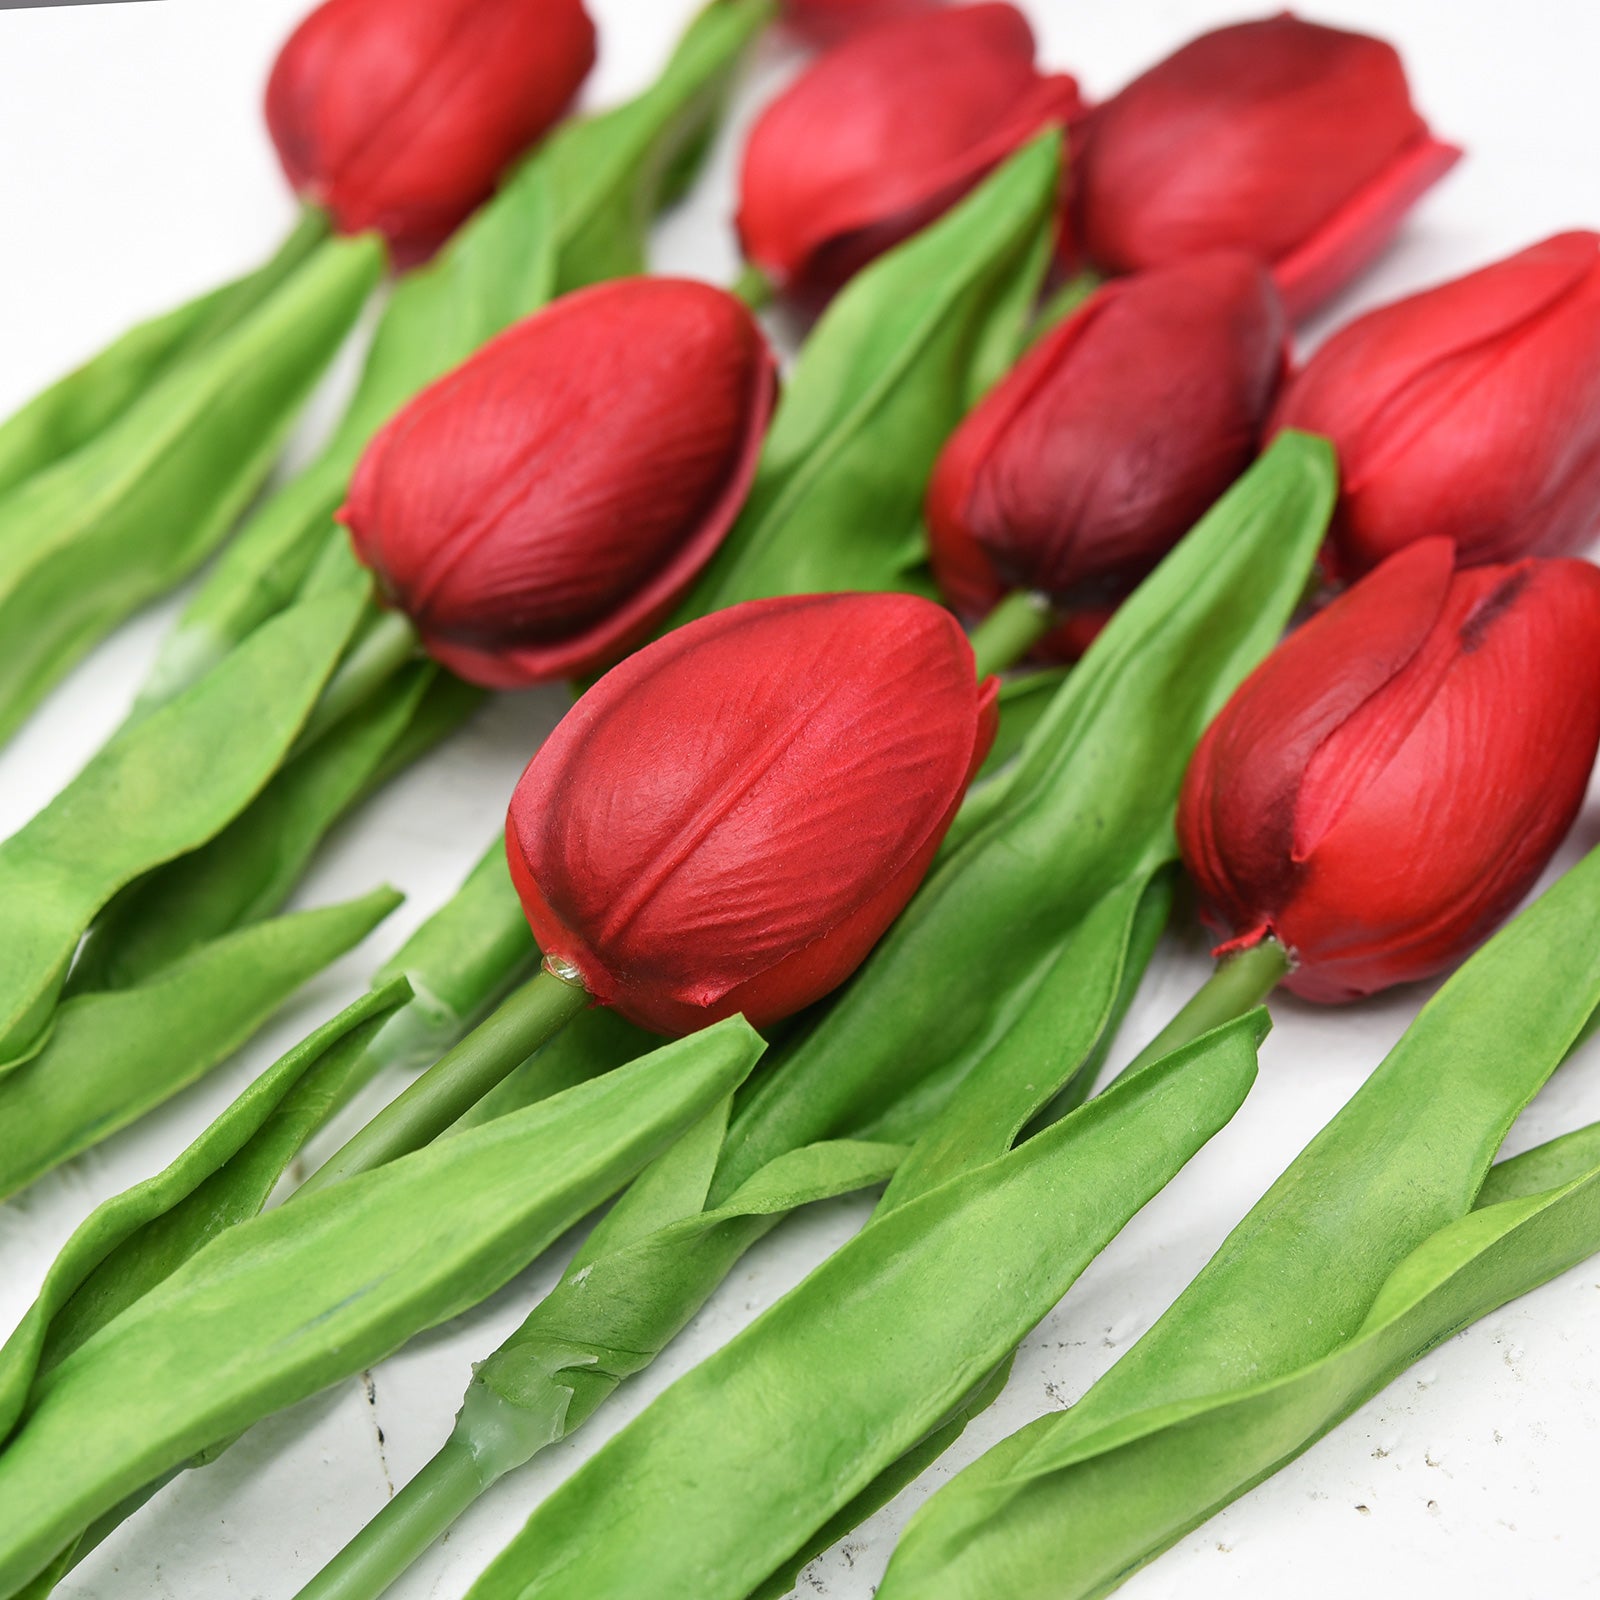 Dark Red Real Touch Tulips Artificial Flowers Bouquet 10 Stems